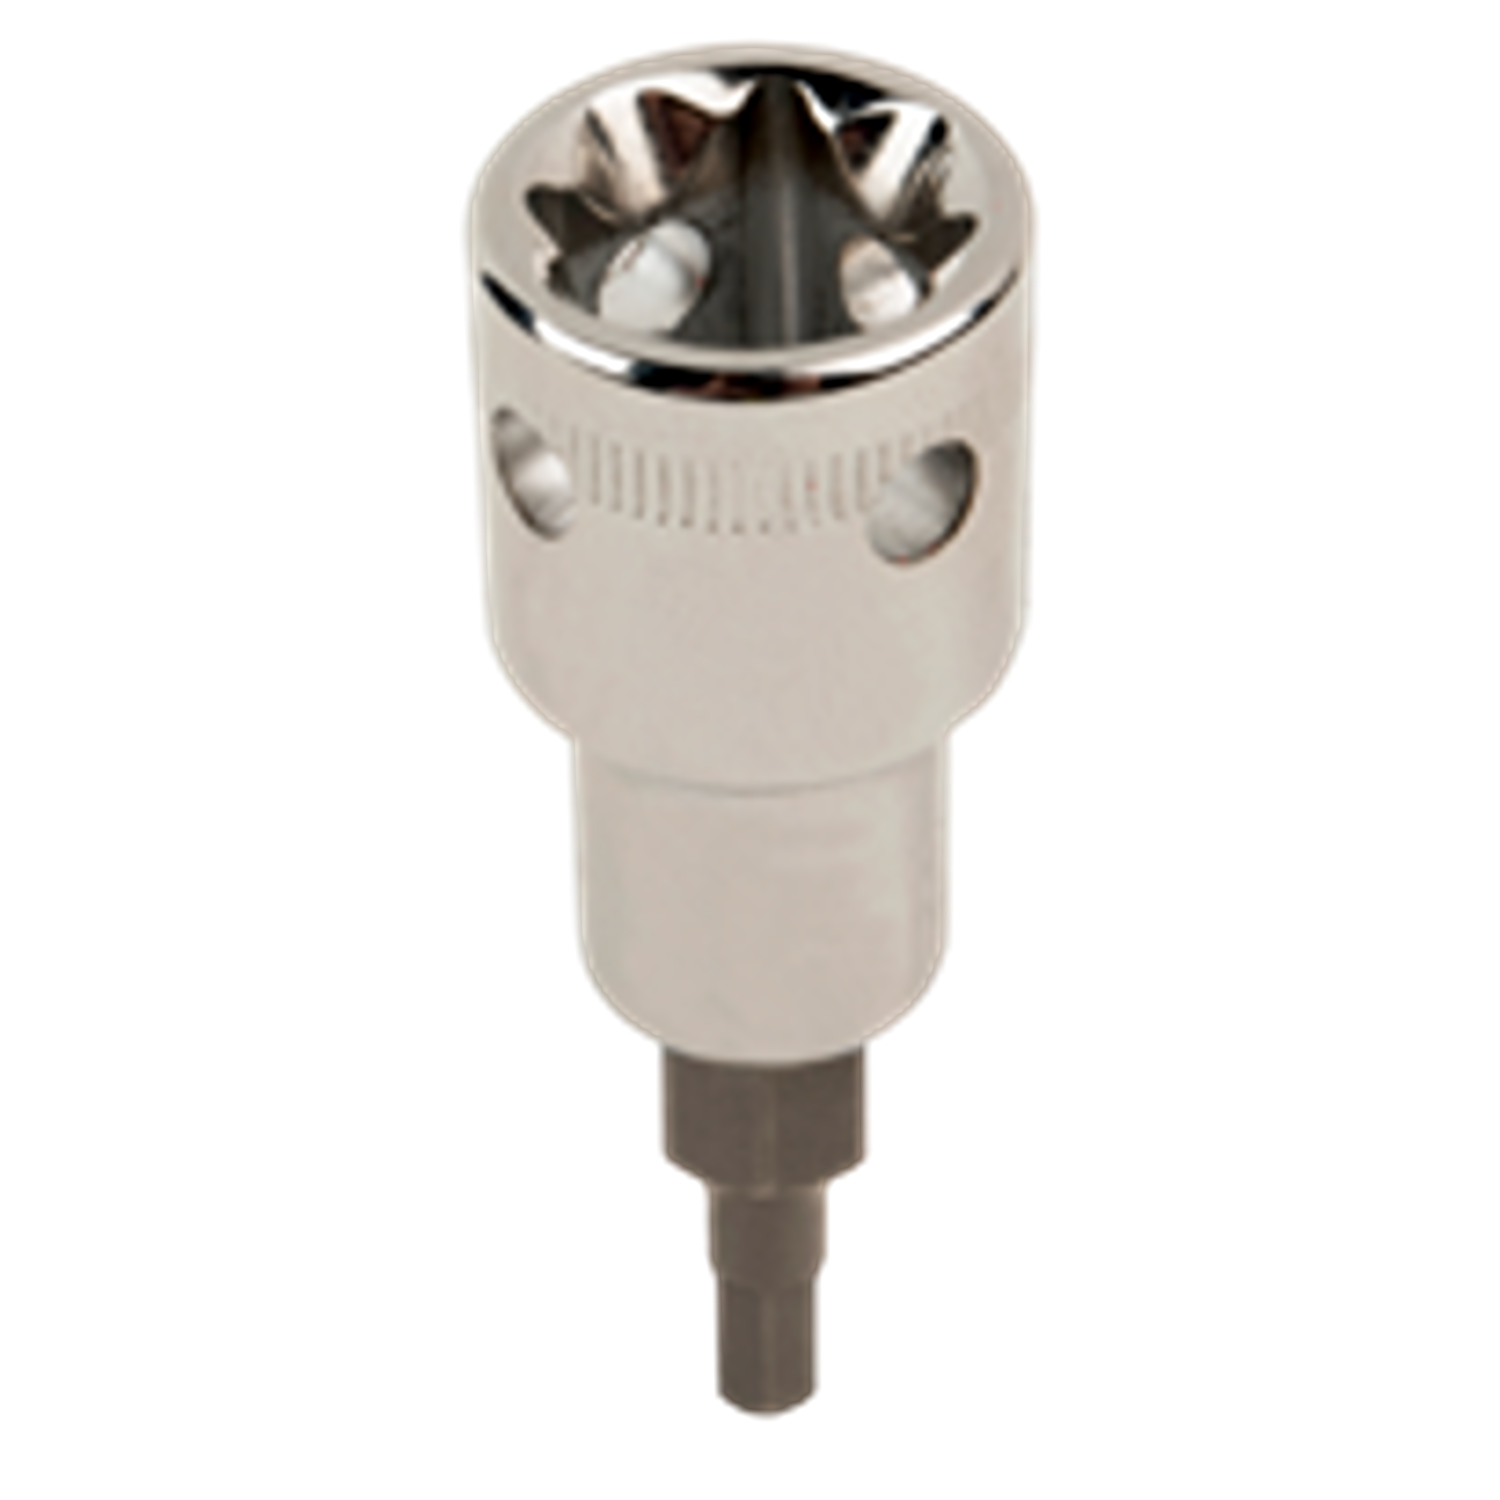 BAHCO TAH16H 1/2” Square Drive Socket Drivers for Metric Hex - Premium 1/2” Square Drive Socket from BAHCO - Shop now at Yew Aik.